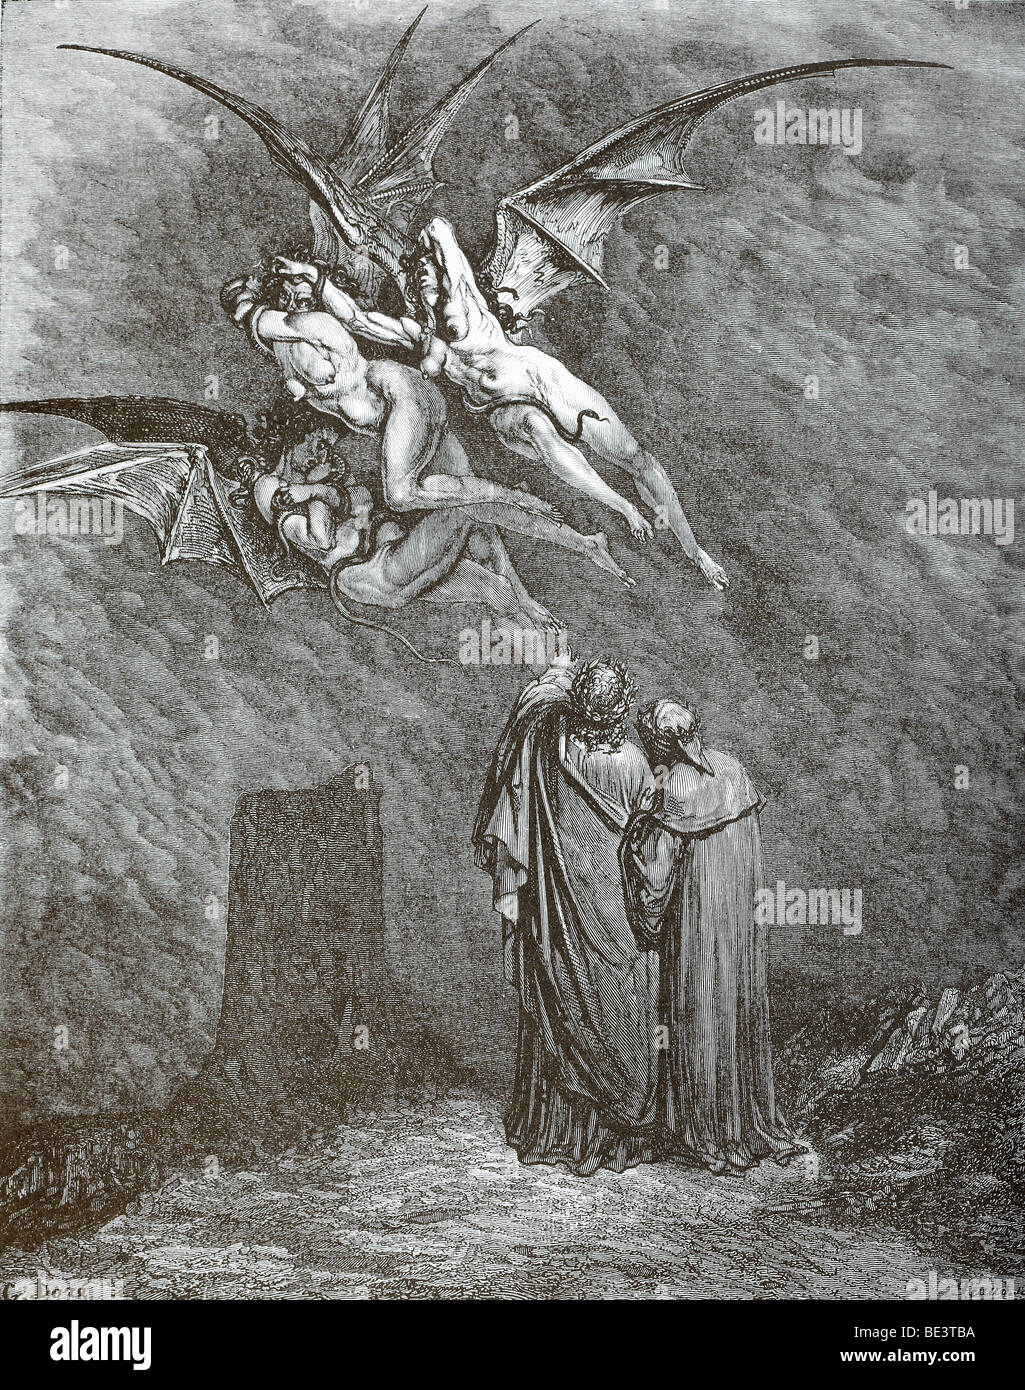 Dante: Inferno. /N'My Teacher Sage; Aware, Thrusting Him Back: Away! Down  There; To The Other Dogs.' Wood Engraving, 1861, After Gustave Dore.